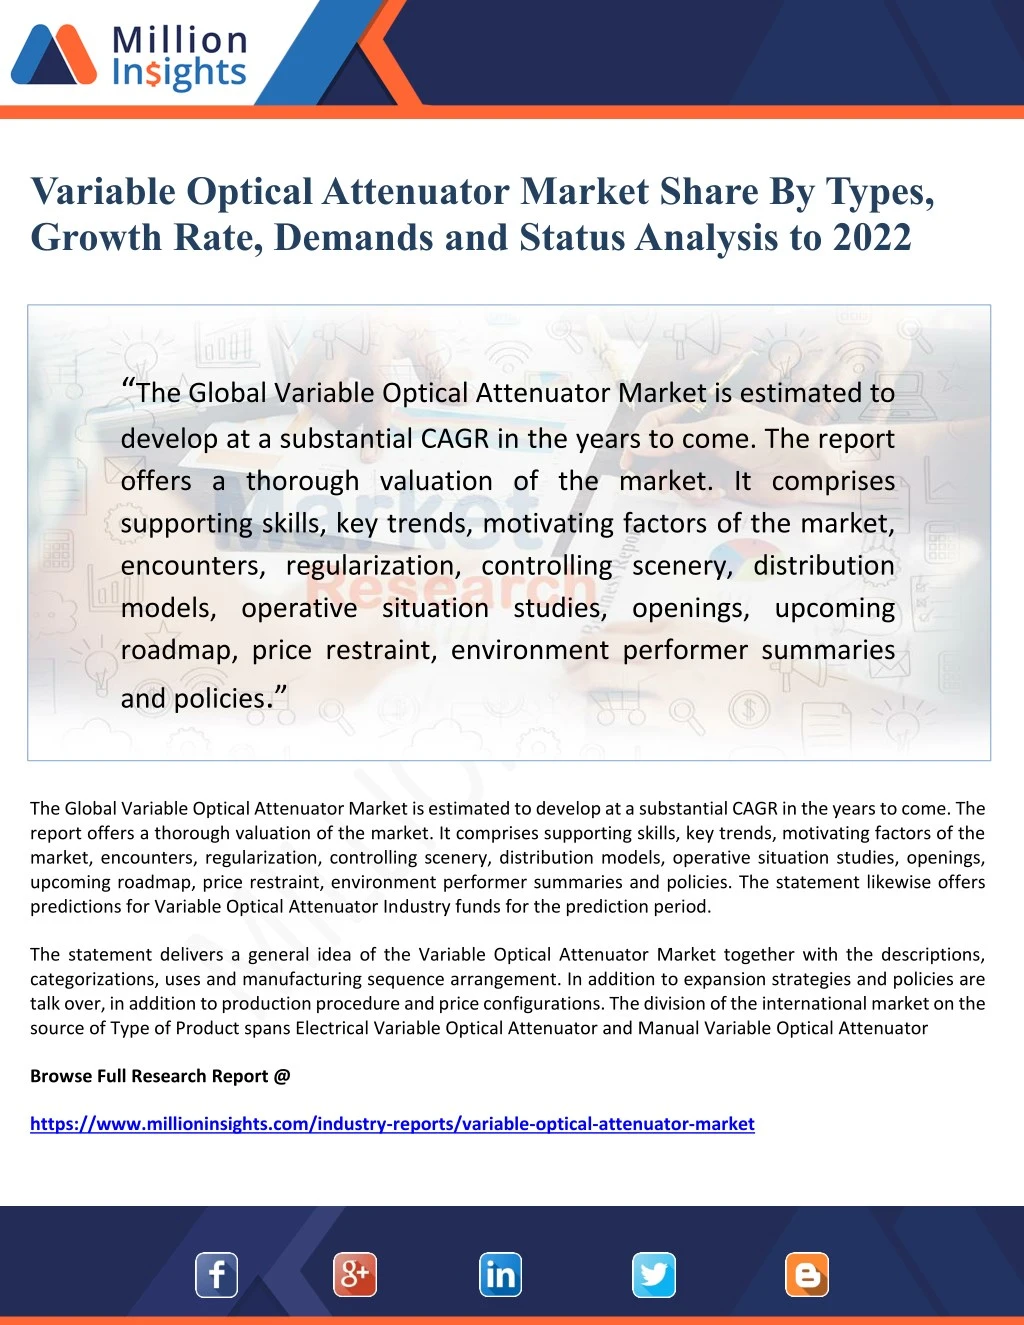 variable optical attenuator market share by types